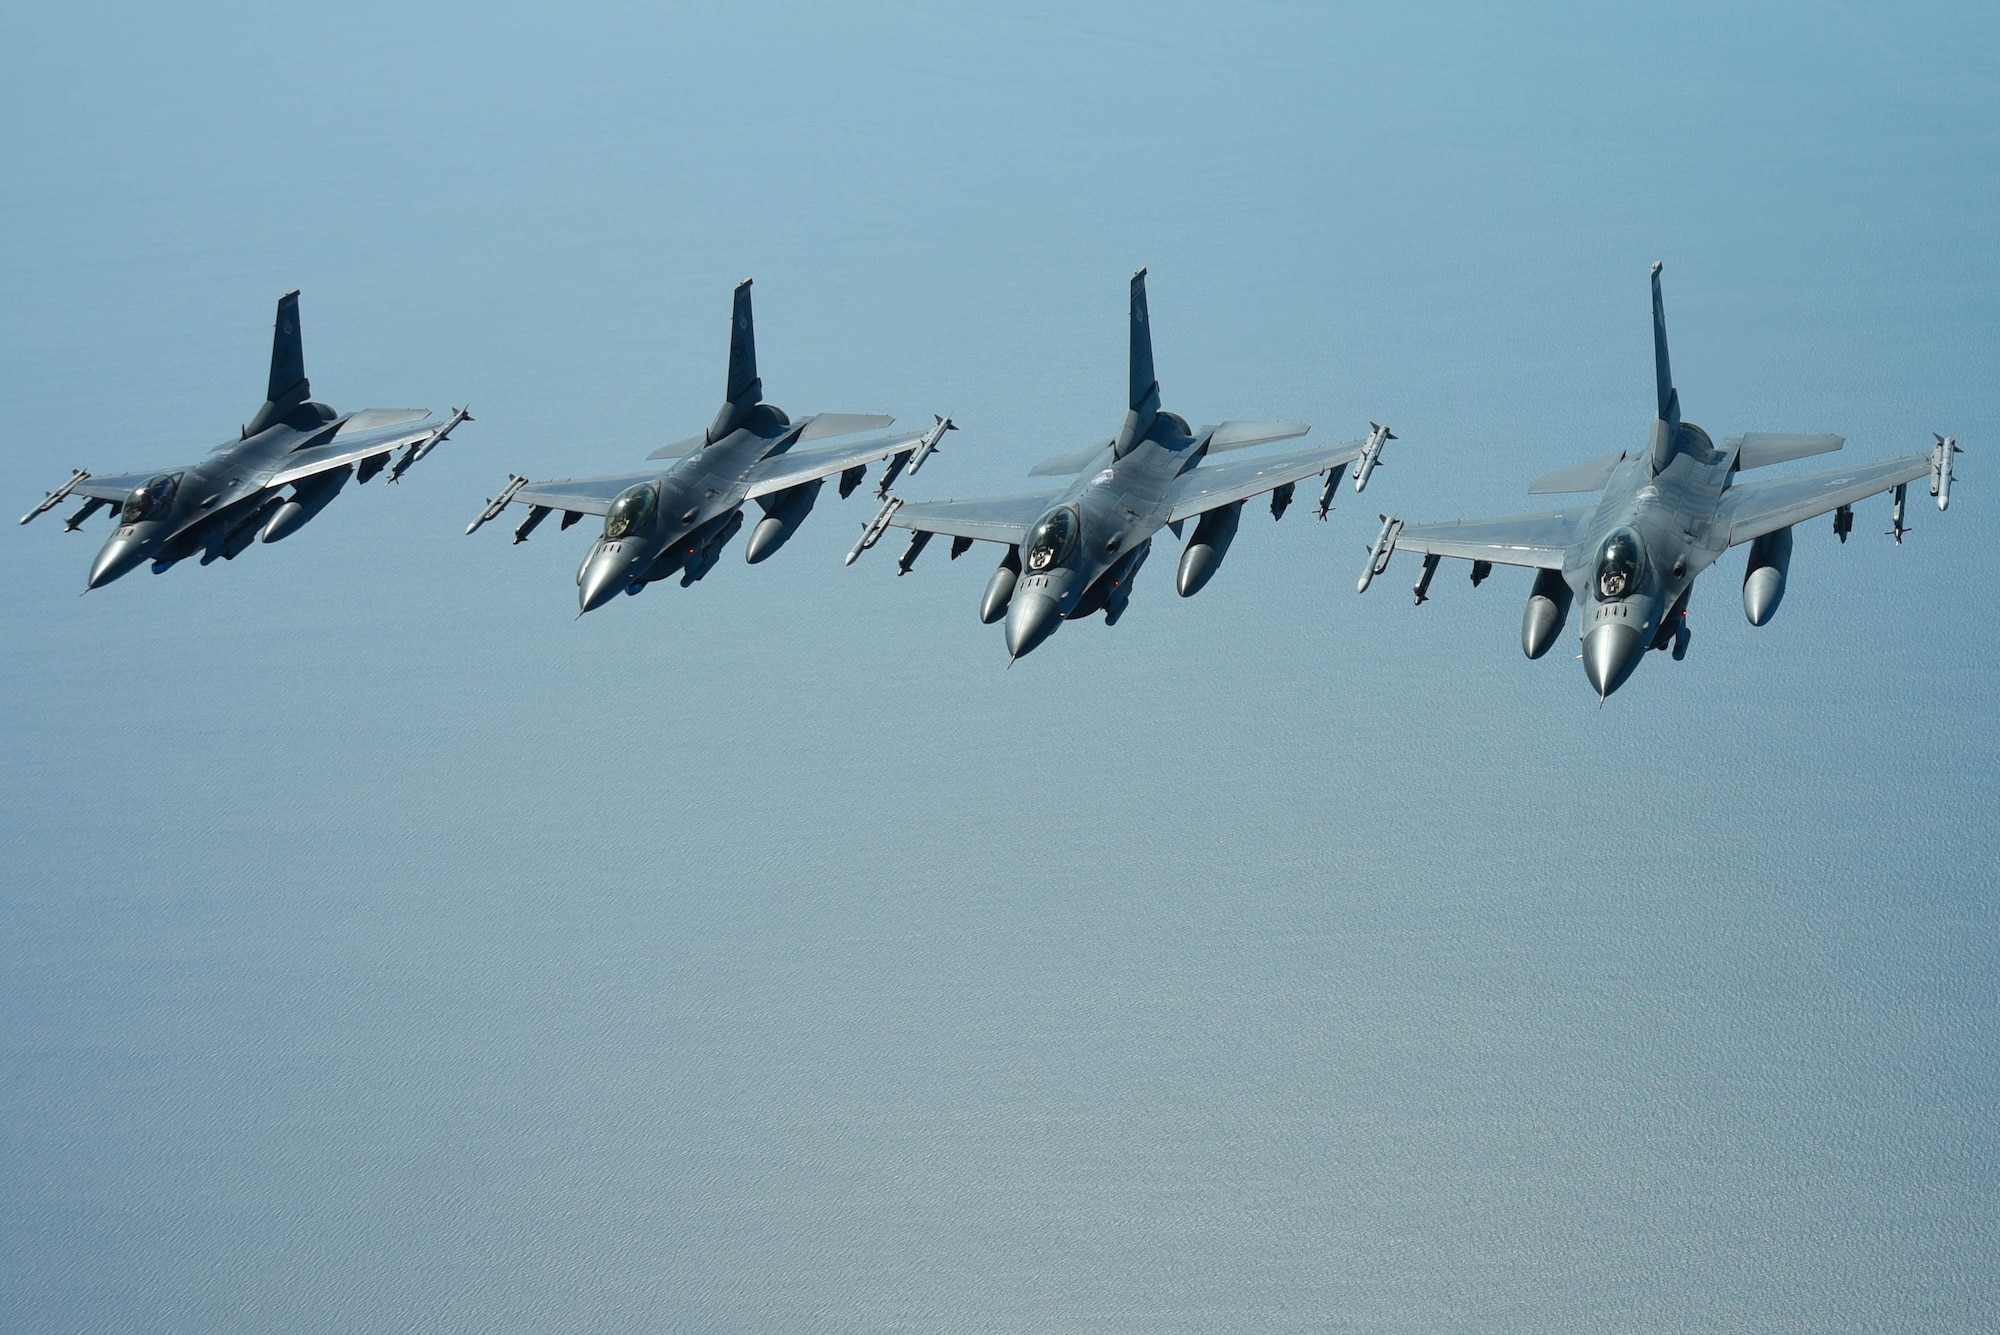 U.S. Air Force pilots assigned to the 77th Fighter Squadron navigate F-16 Fighting Falcons in formation over the Atlantic Ocean, June 20, 2018.